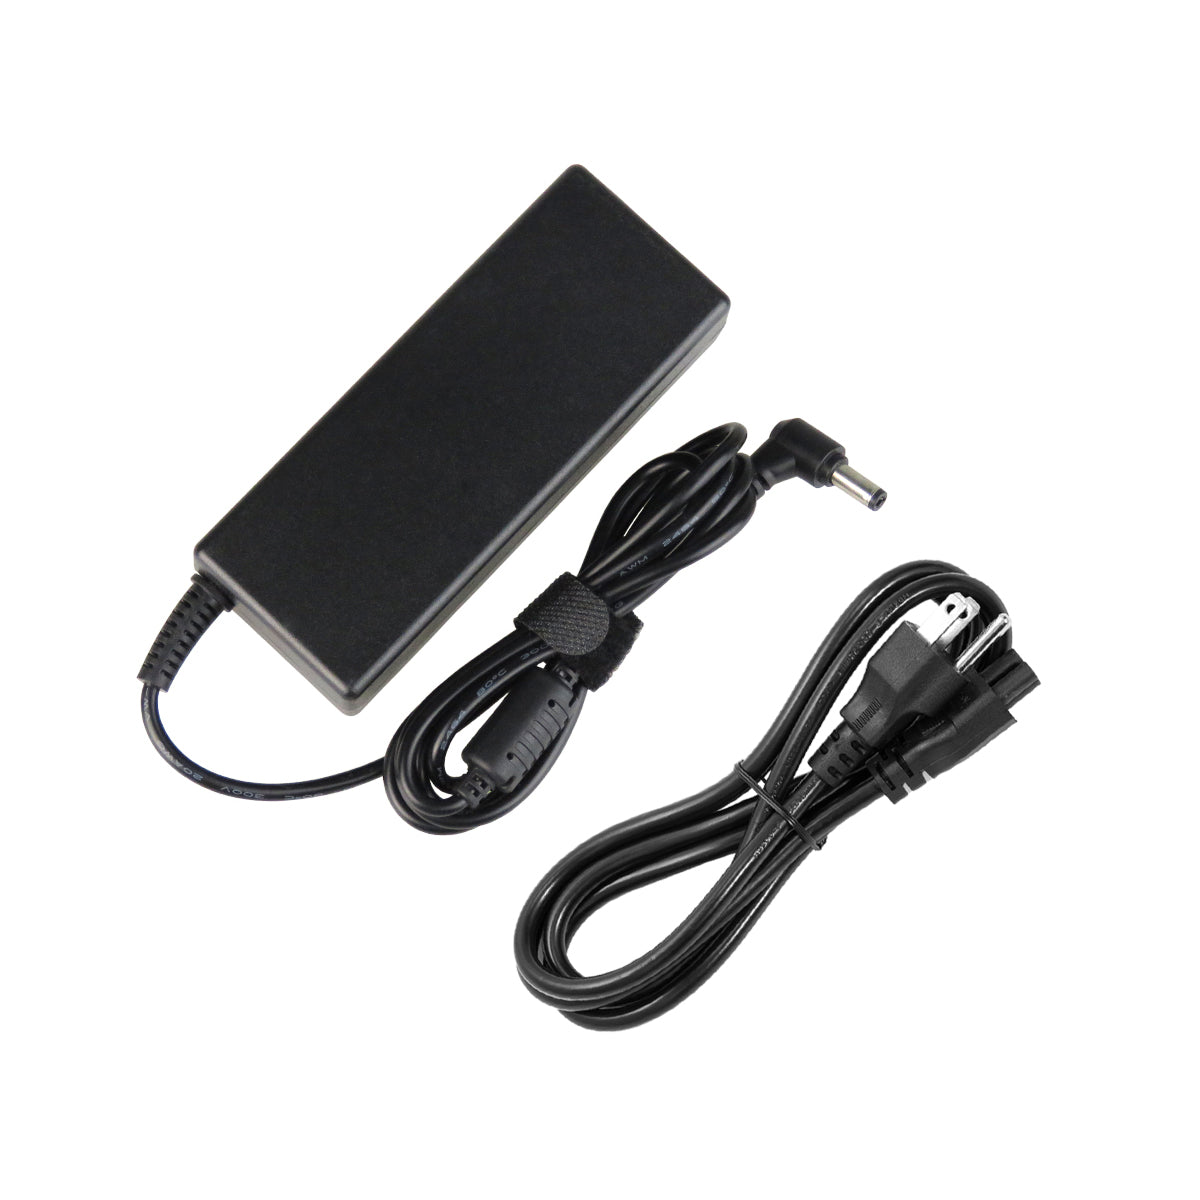 AC Adapter Charger for ASUS A8Z Laptop.